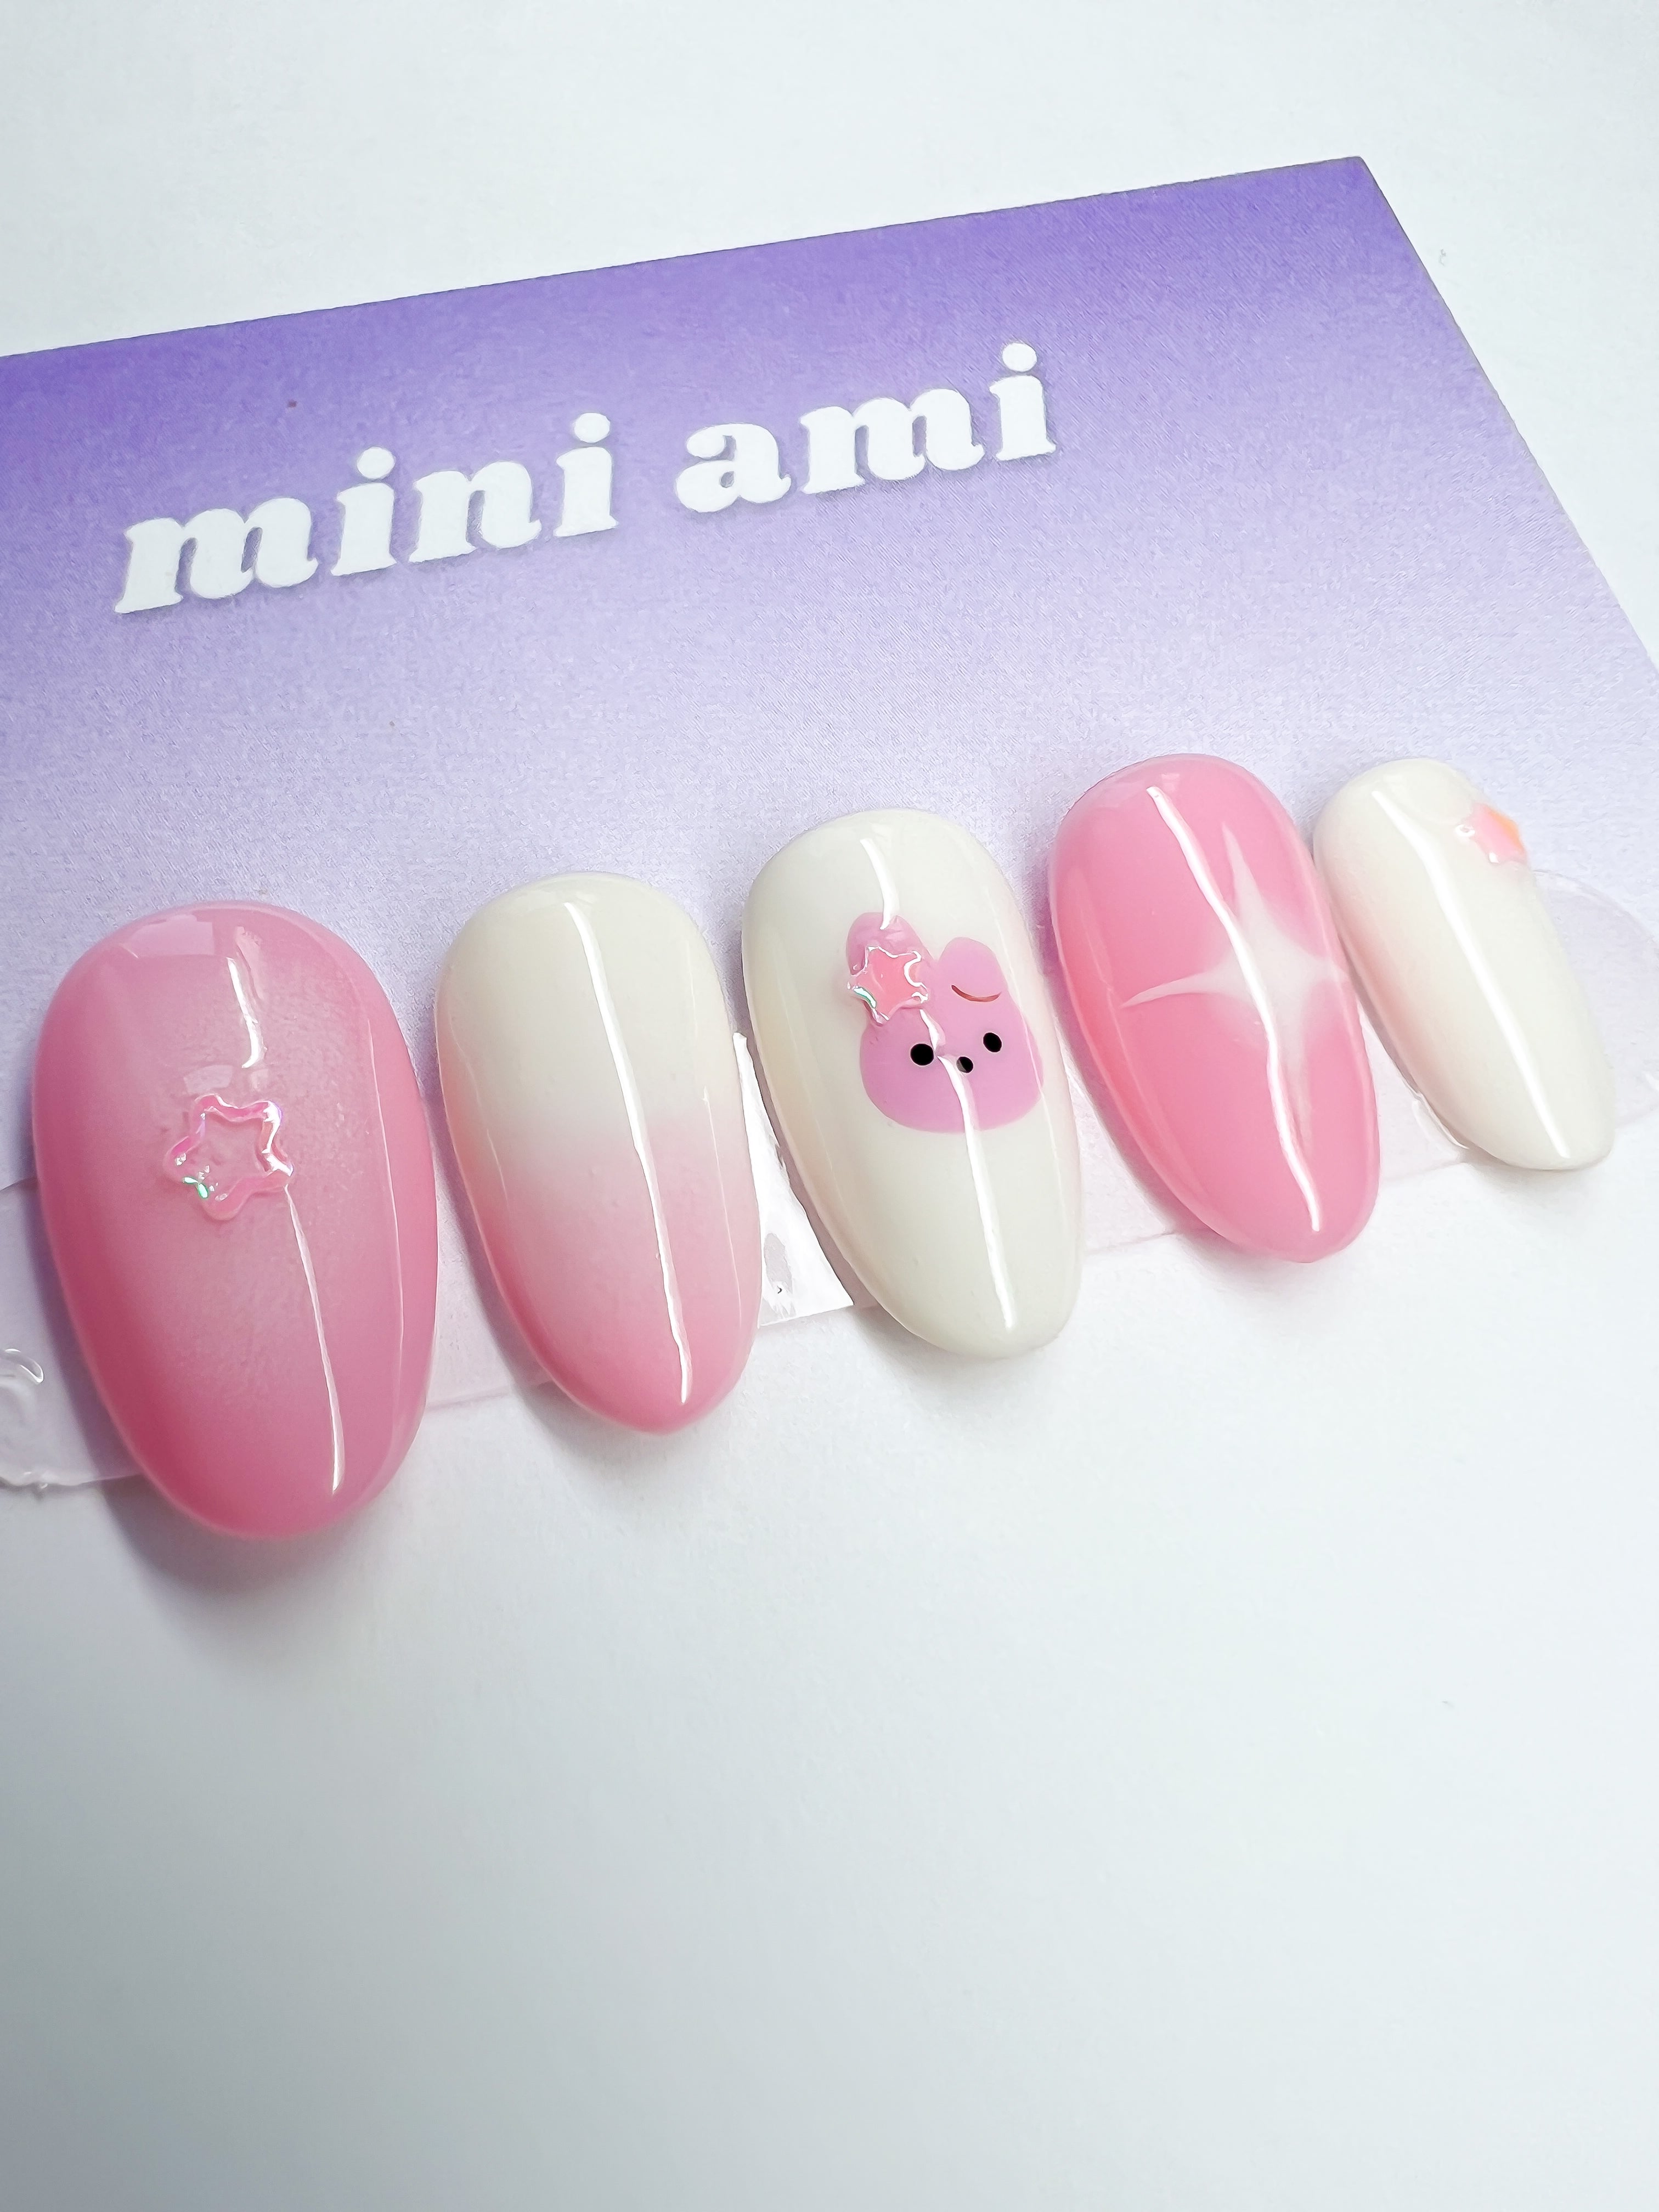 100% gel and 100% hand painted, Mini Ami nails are as strong as